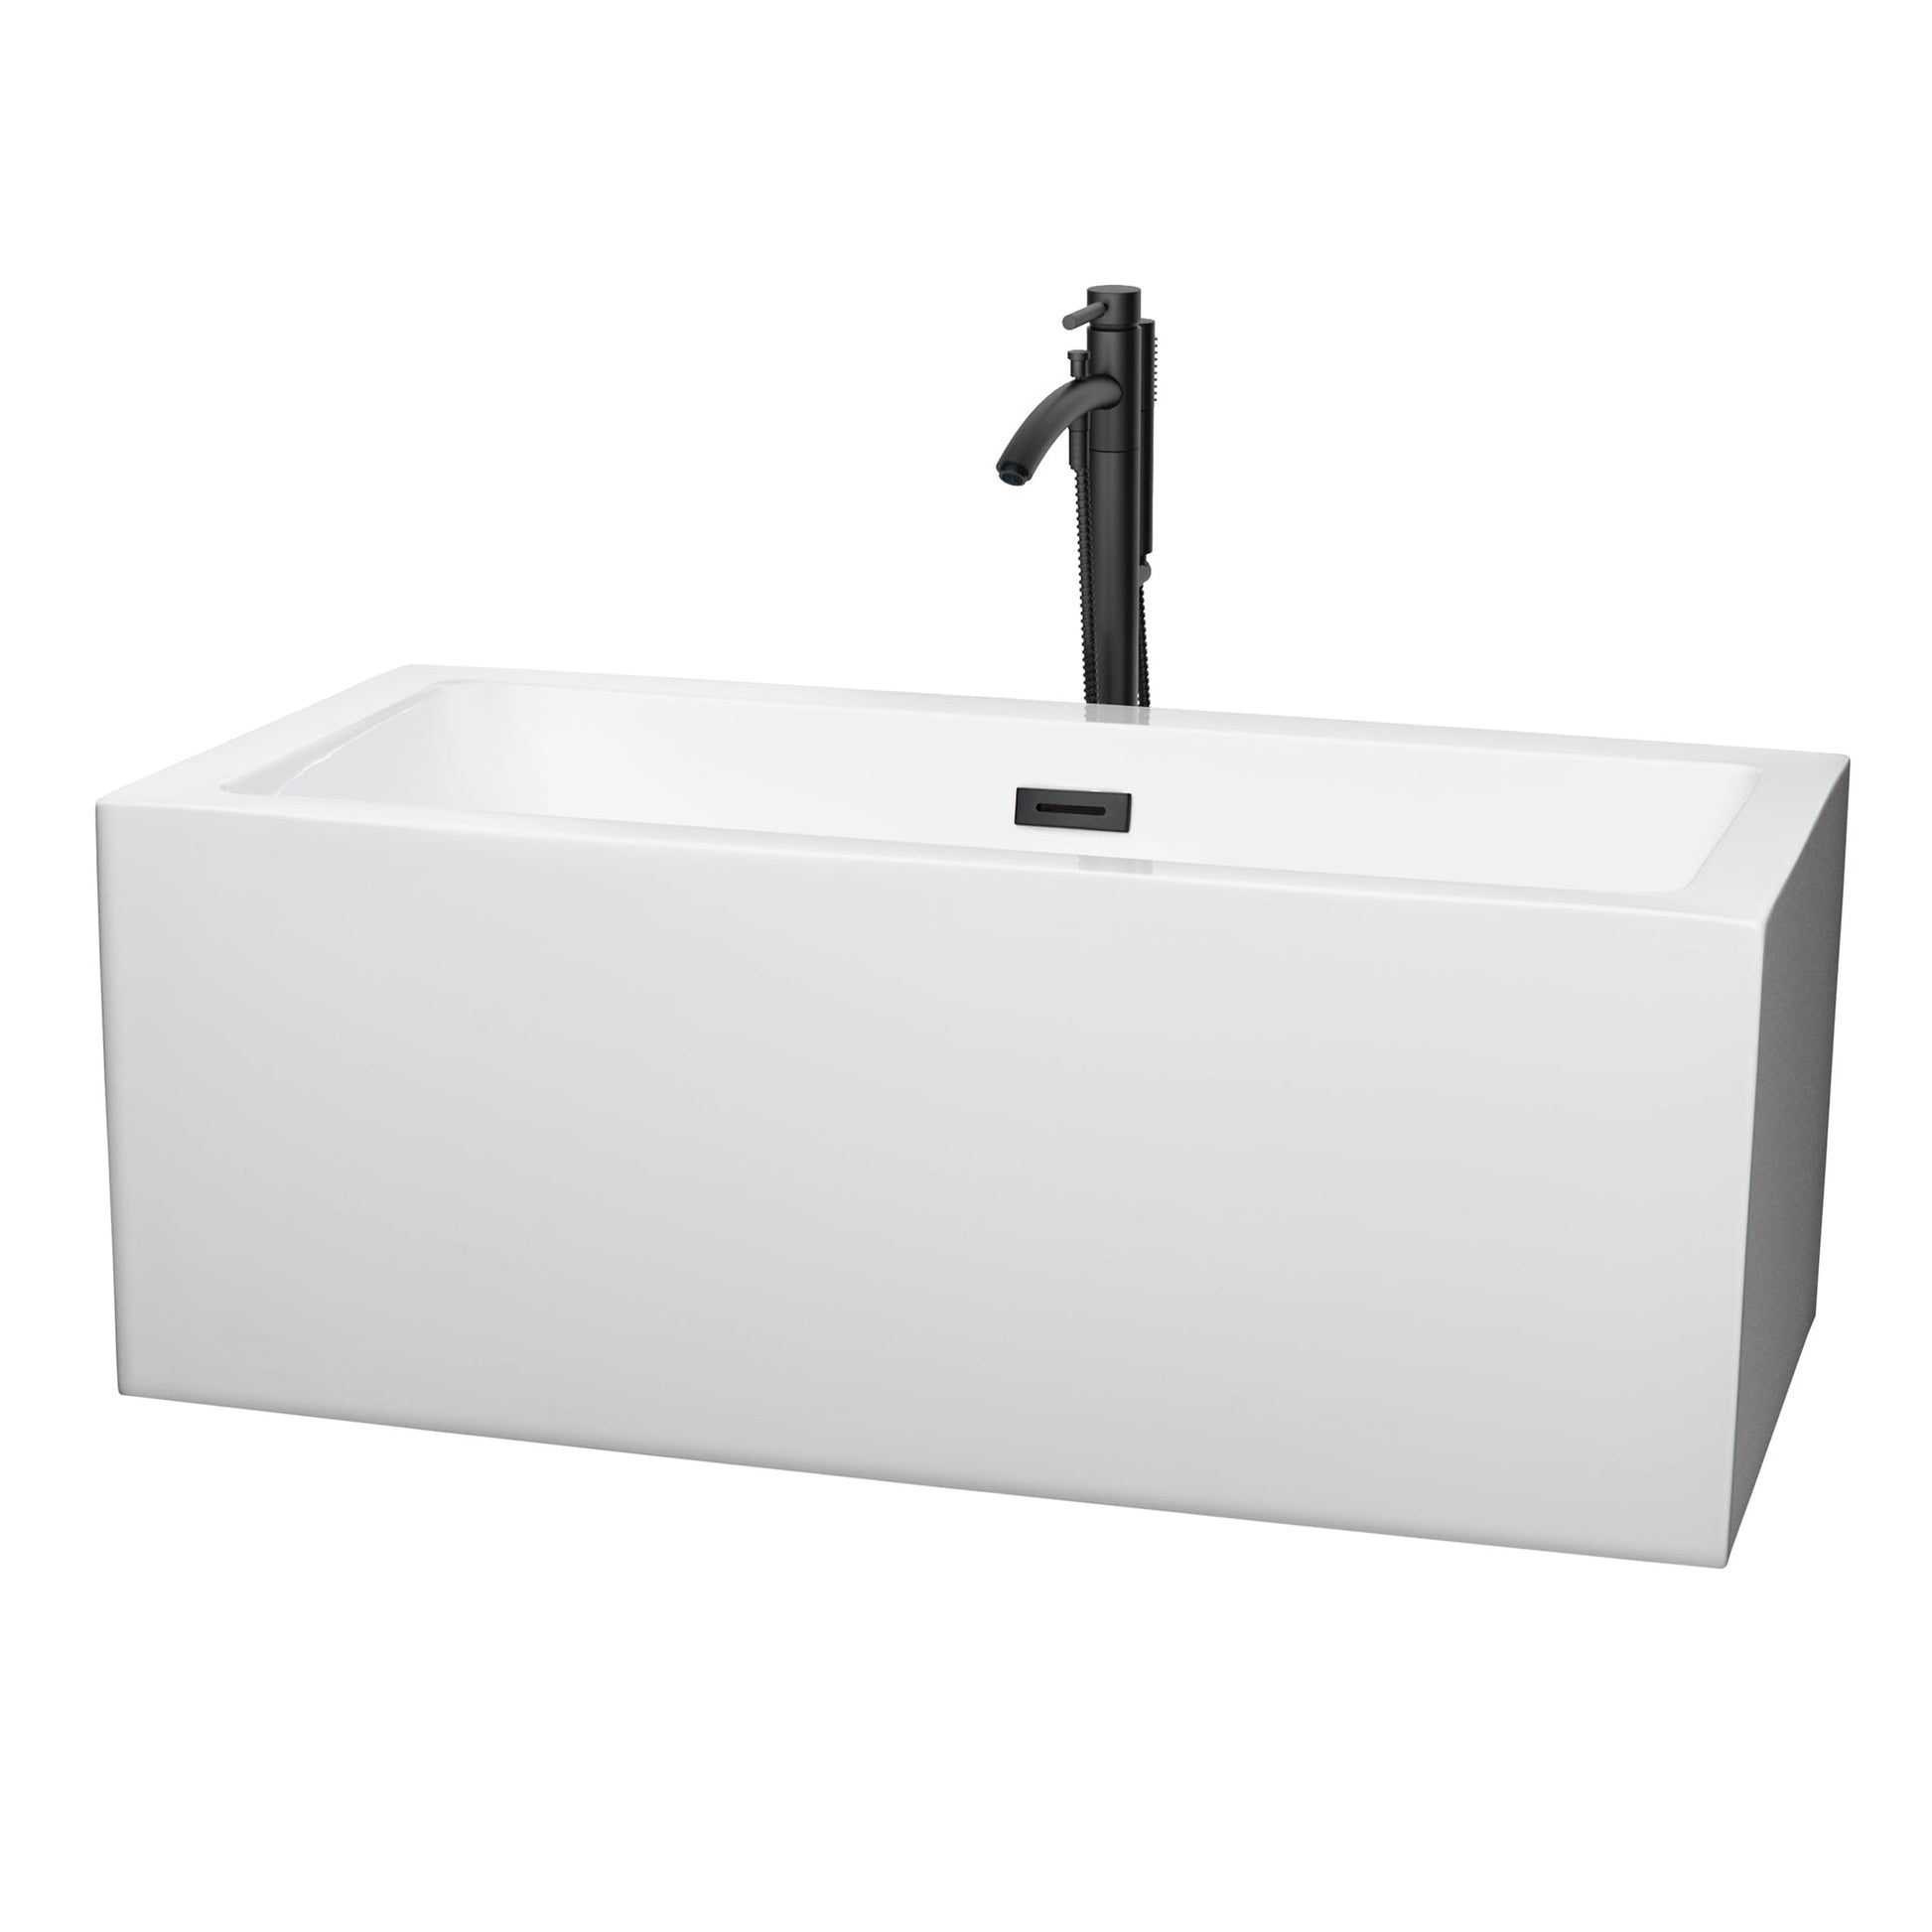 Wyndham Collection Melody 60" Freestanding Bathtub in White With Floor Mounted Faucet, Drain and Overflow Trim in Matte Black